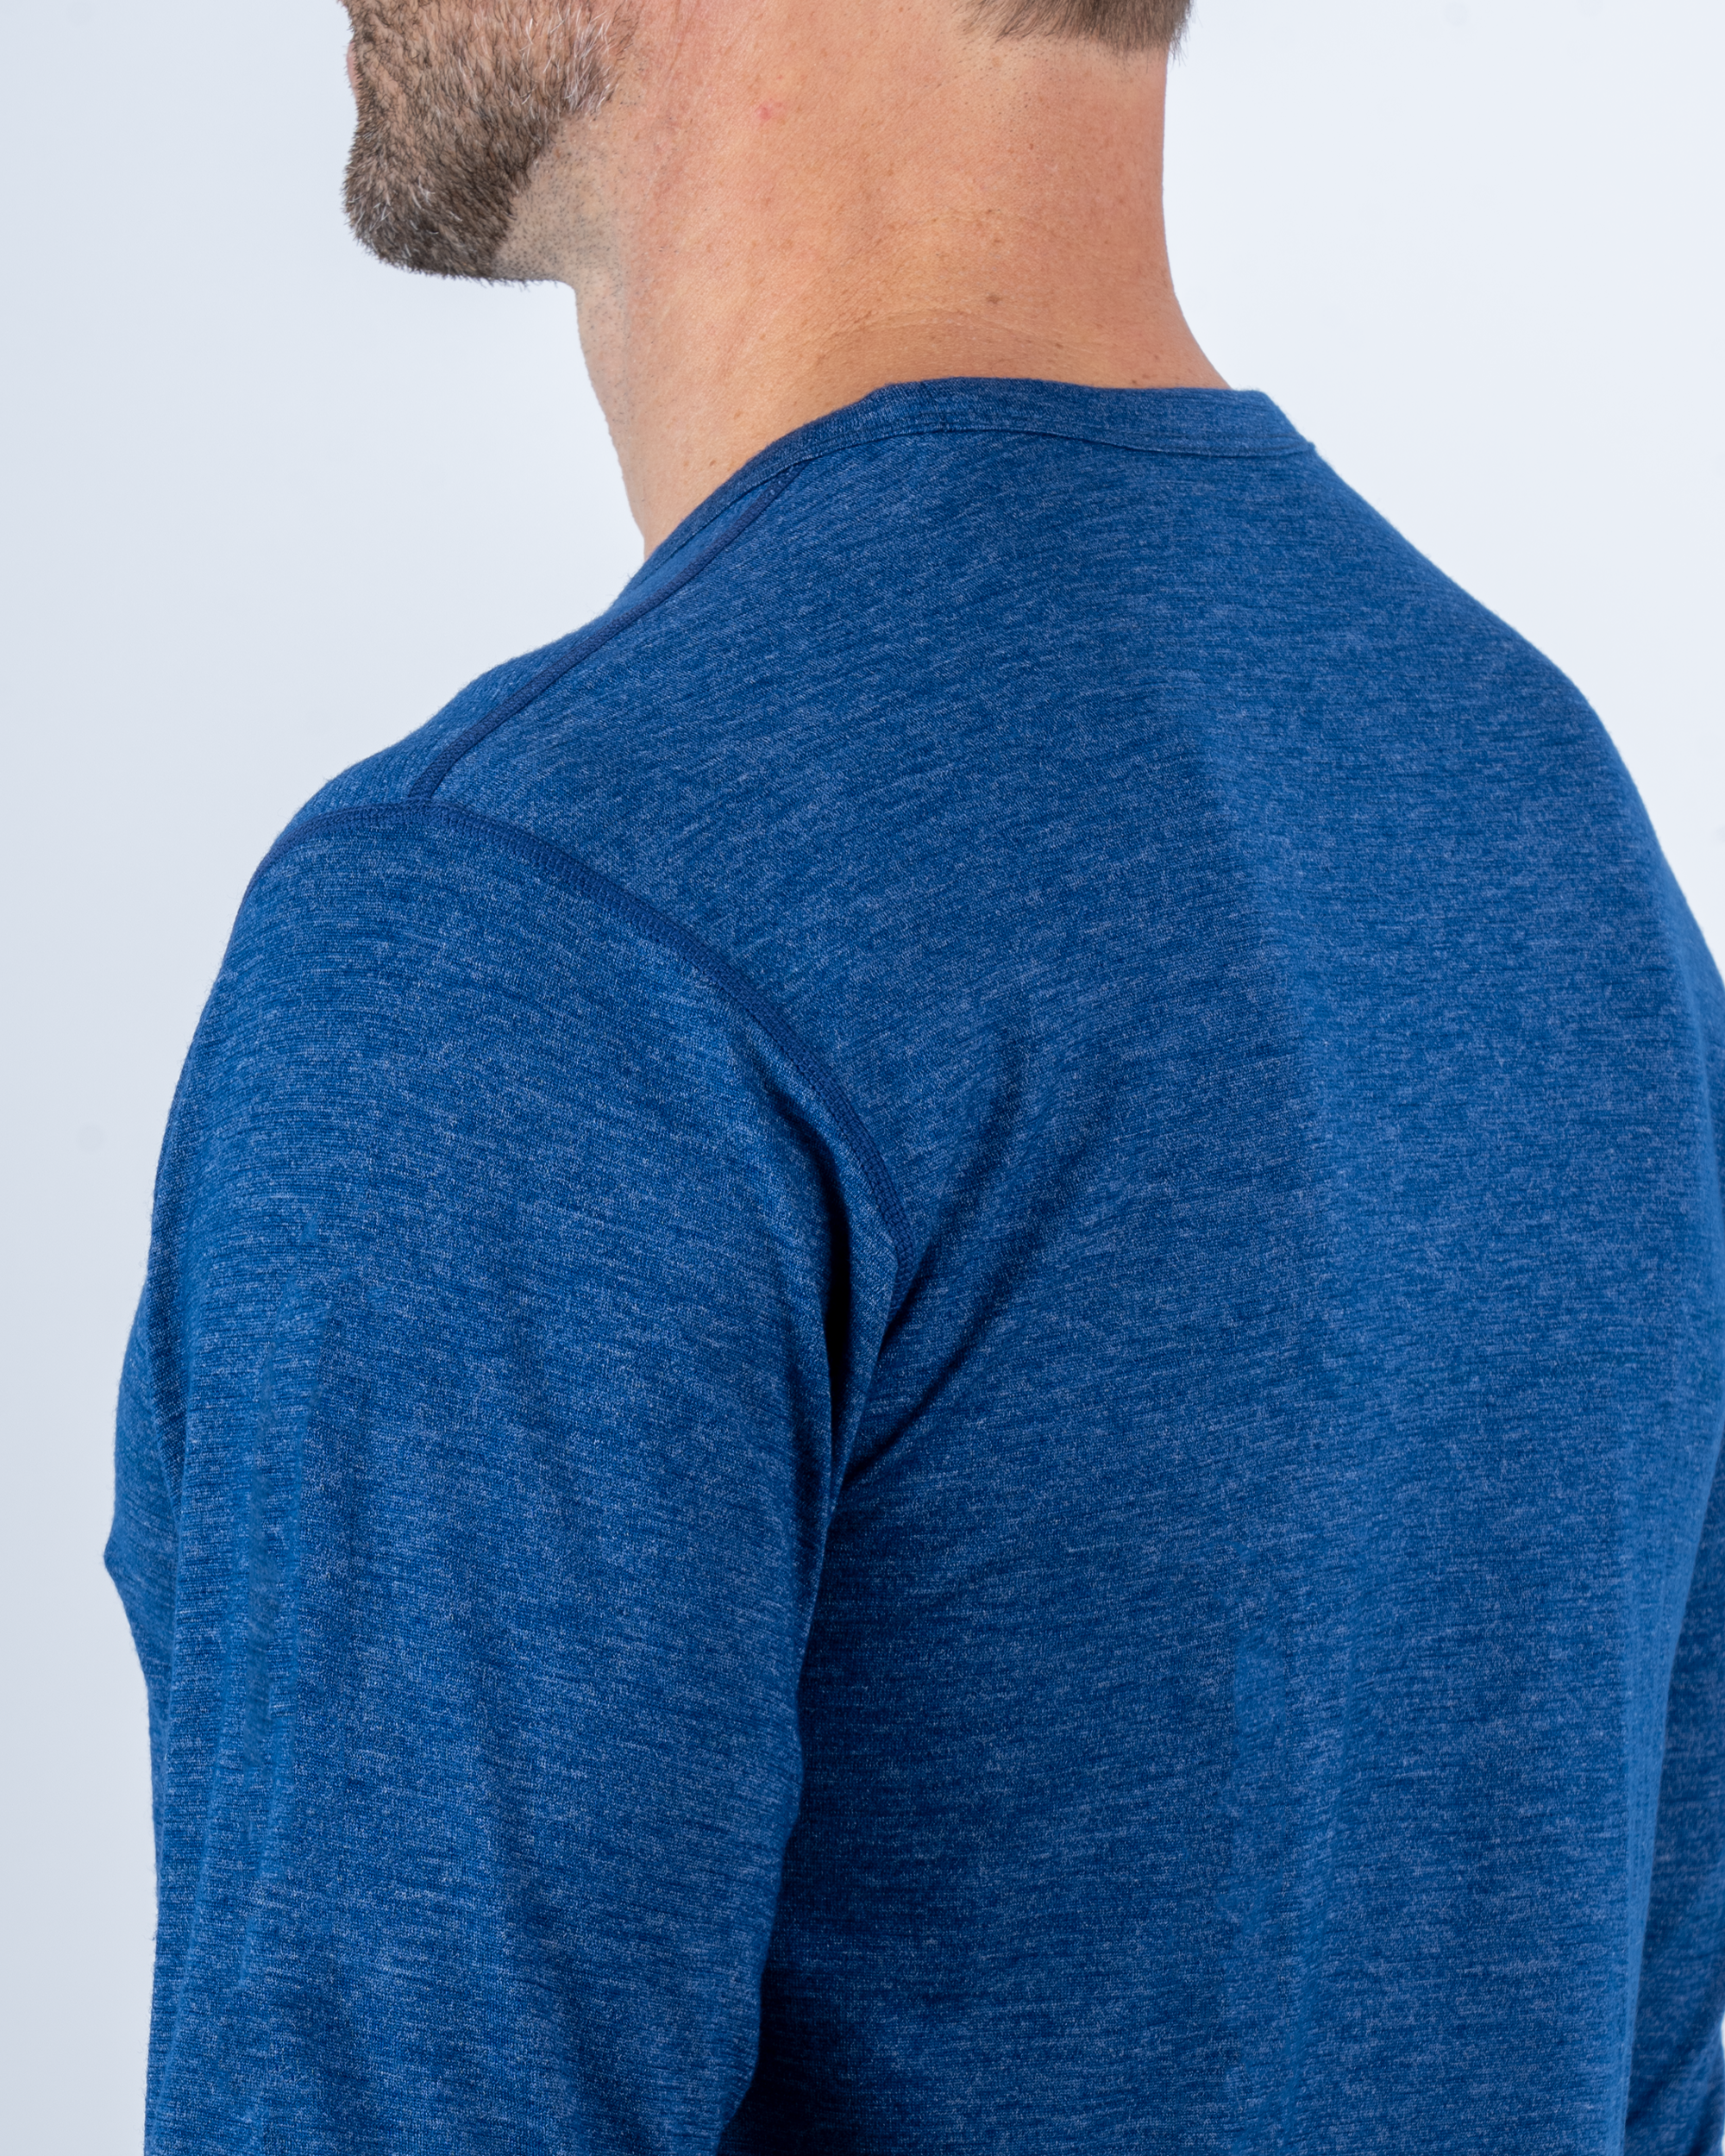 Foreign Rider Co Nuyarn Merino Wool Blue Heather Base Layer Long Sleeve T-Shirt Back Shoulder and Neck Detail